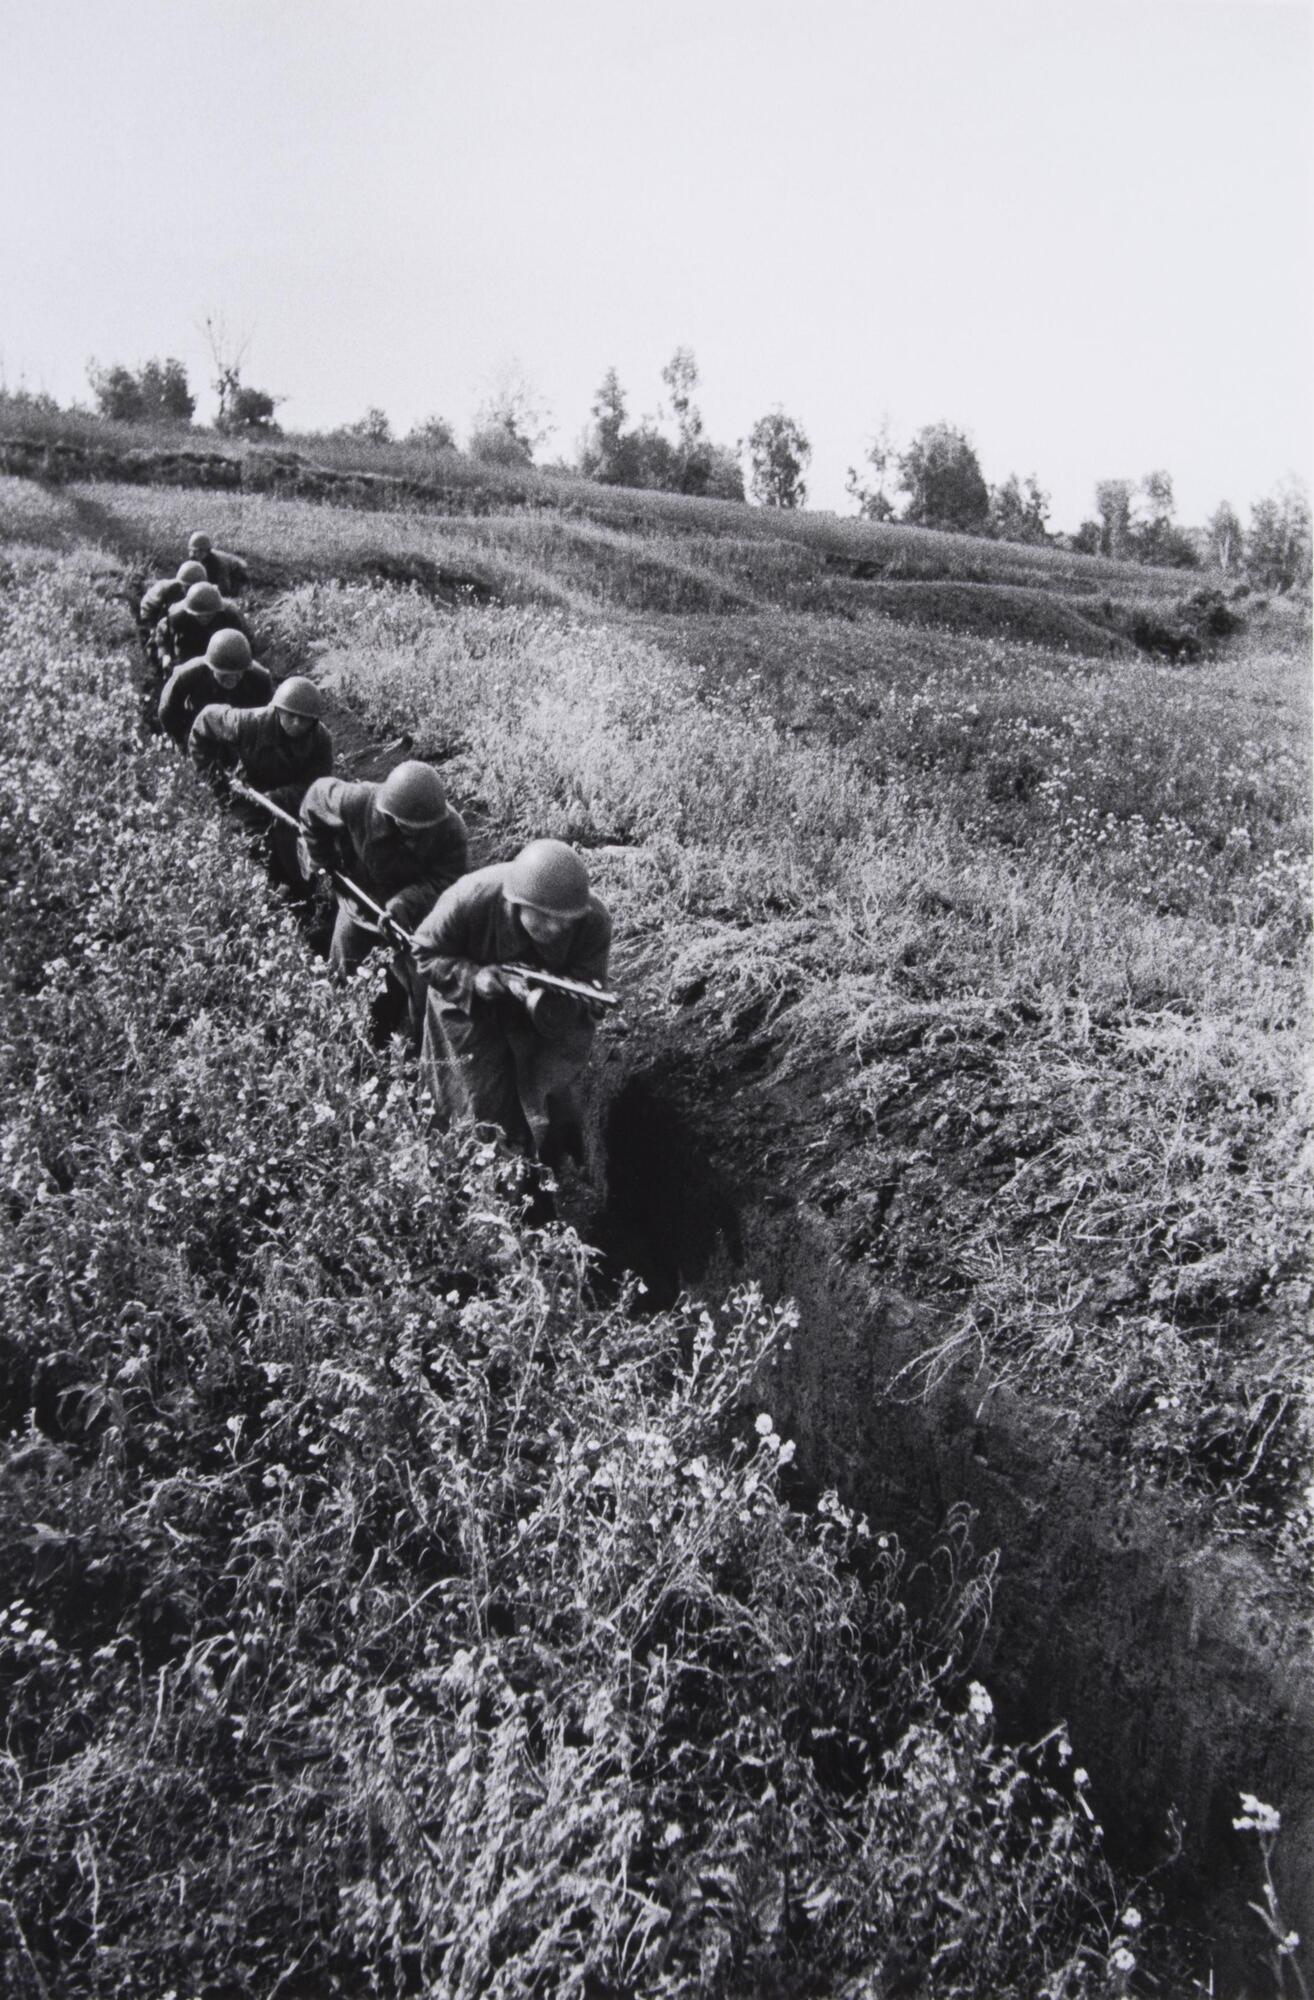 Seven soldiers form a single-file line as they crouch in a shallow trench dug into a field.